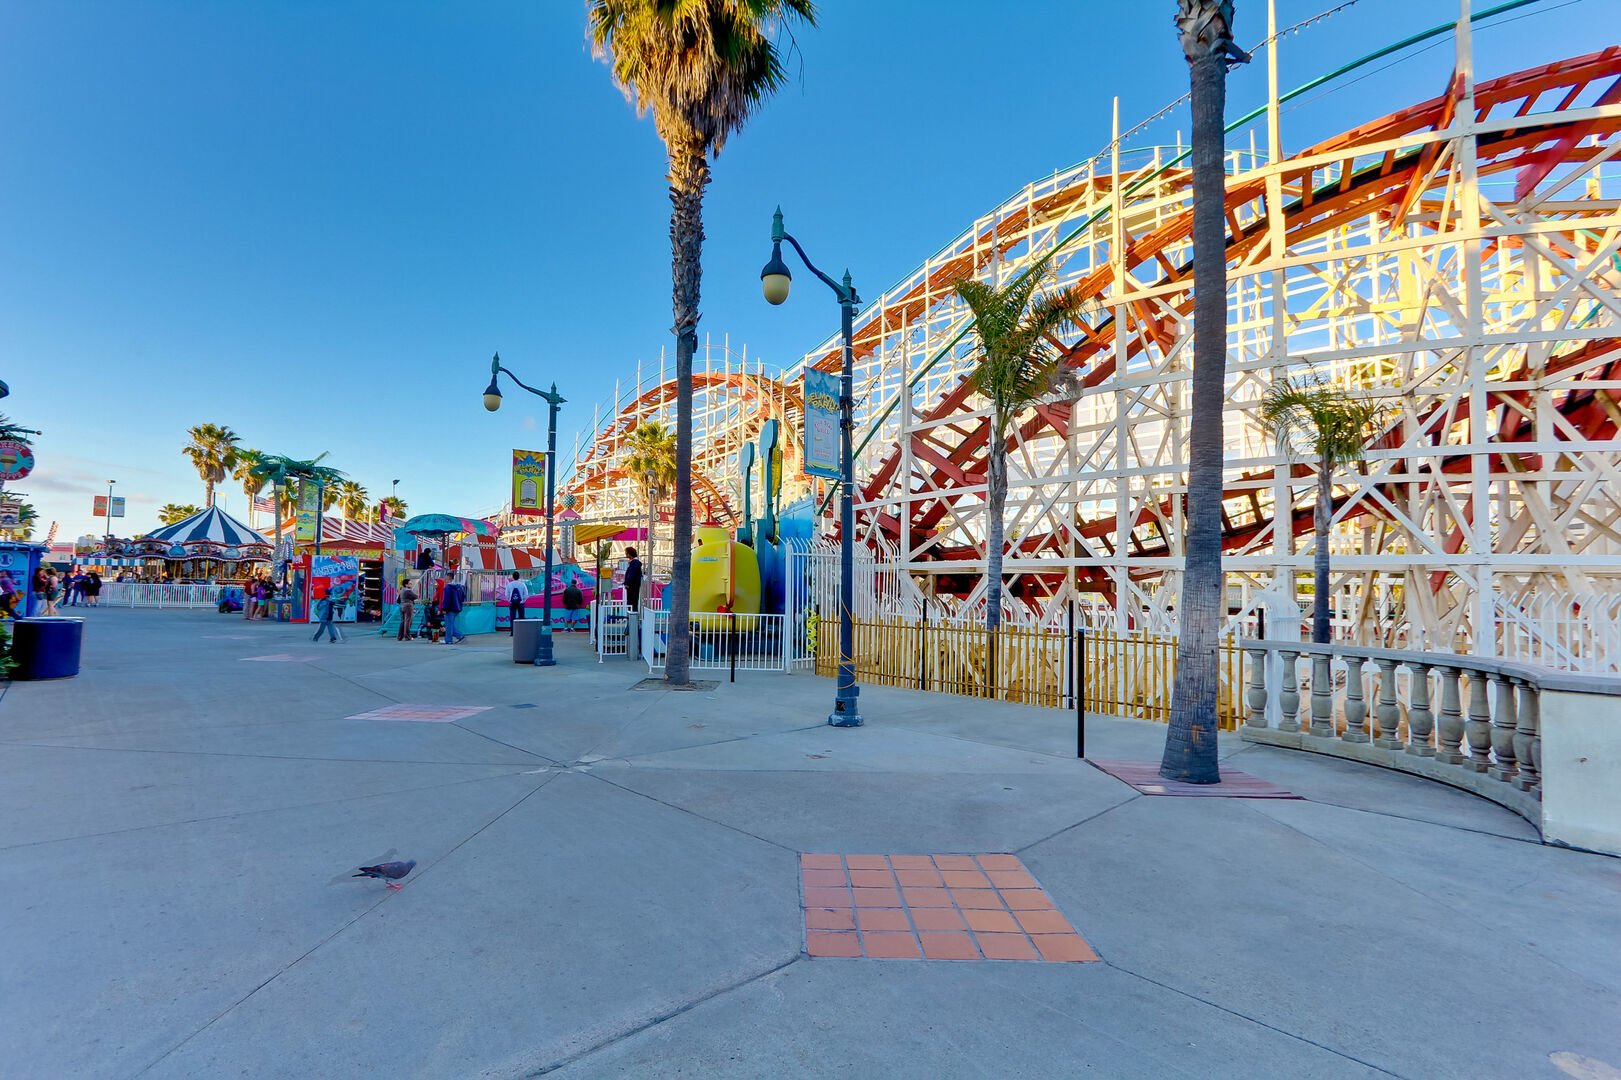 Belmont Amusement Park is the local attraction of Mission Beach and is located just south, walking distance from the condo